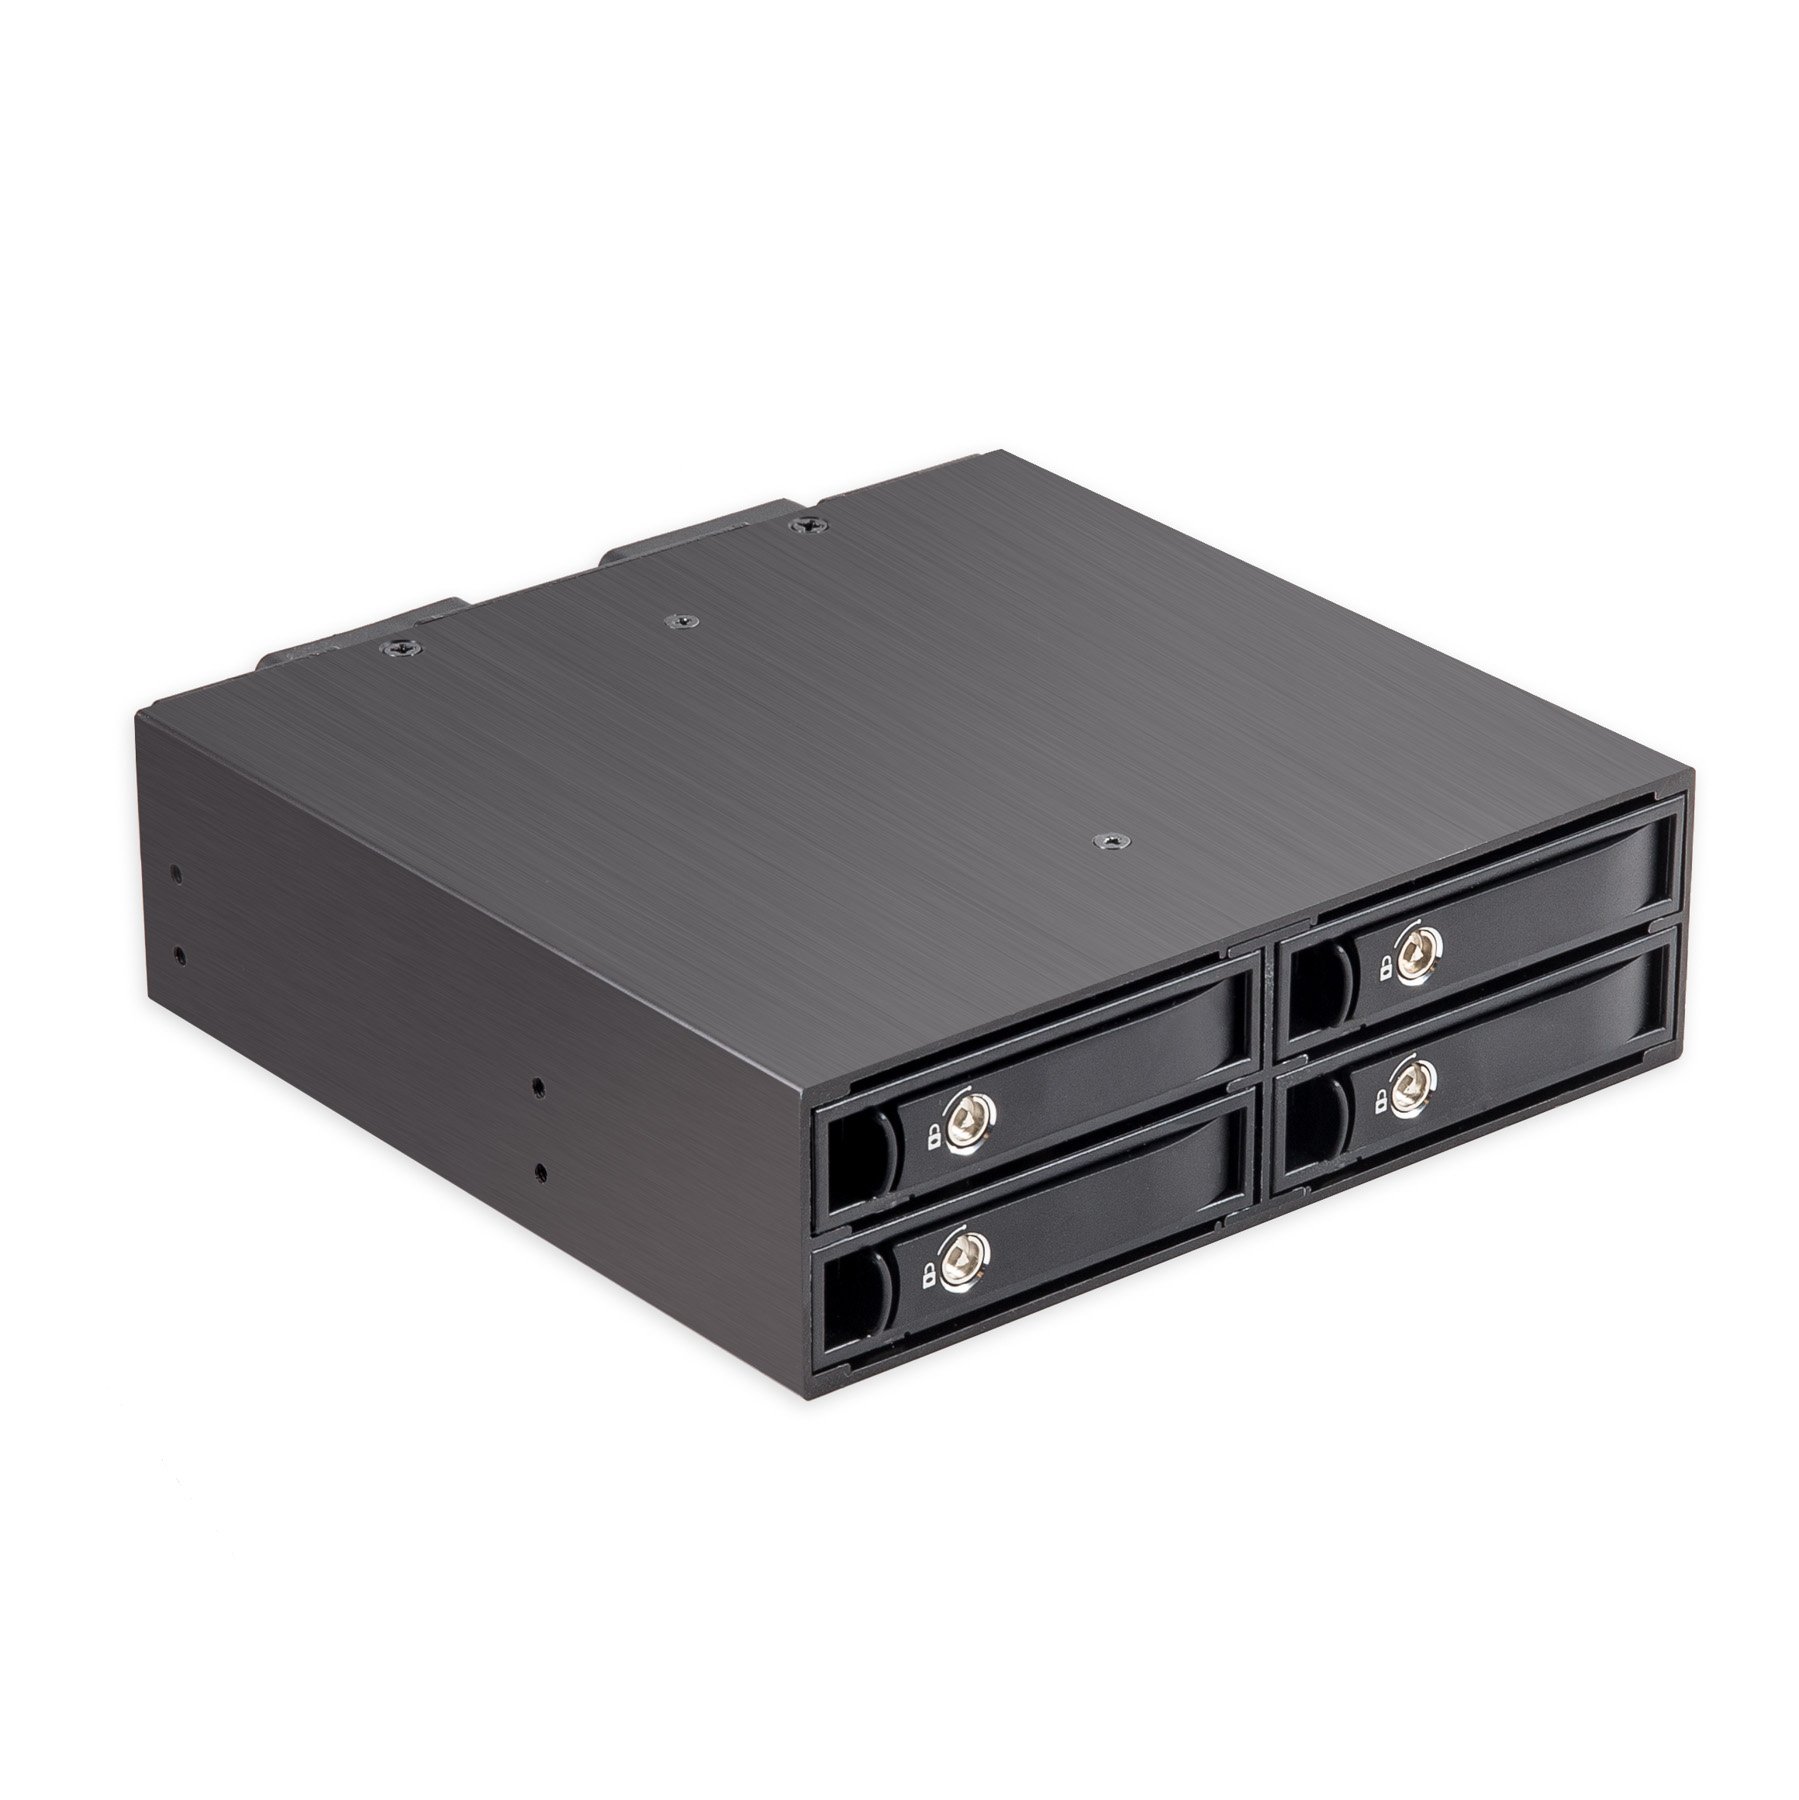 Syba 4 Bay 2.5” SATA Hard Drive Mobile Rack Mount for 5.25" Drive Bays, for HDD SSD SY-MRA25038